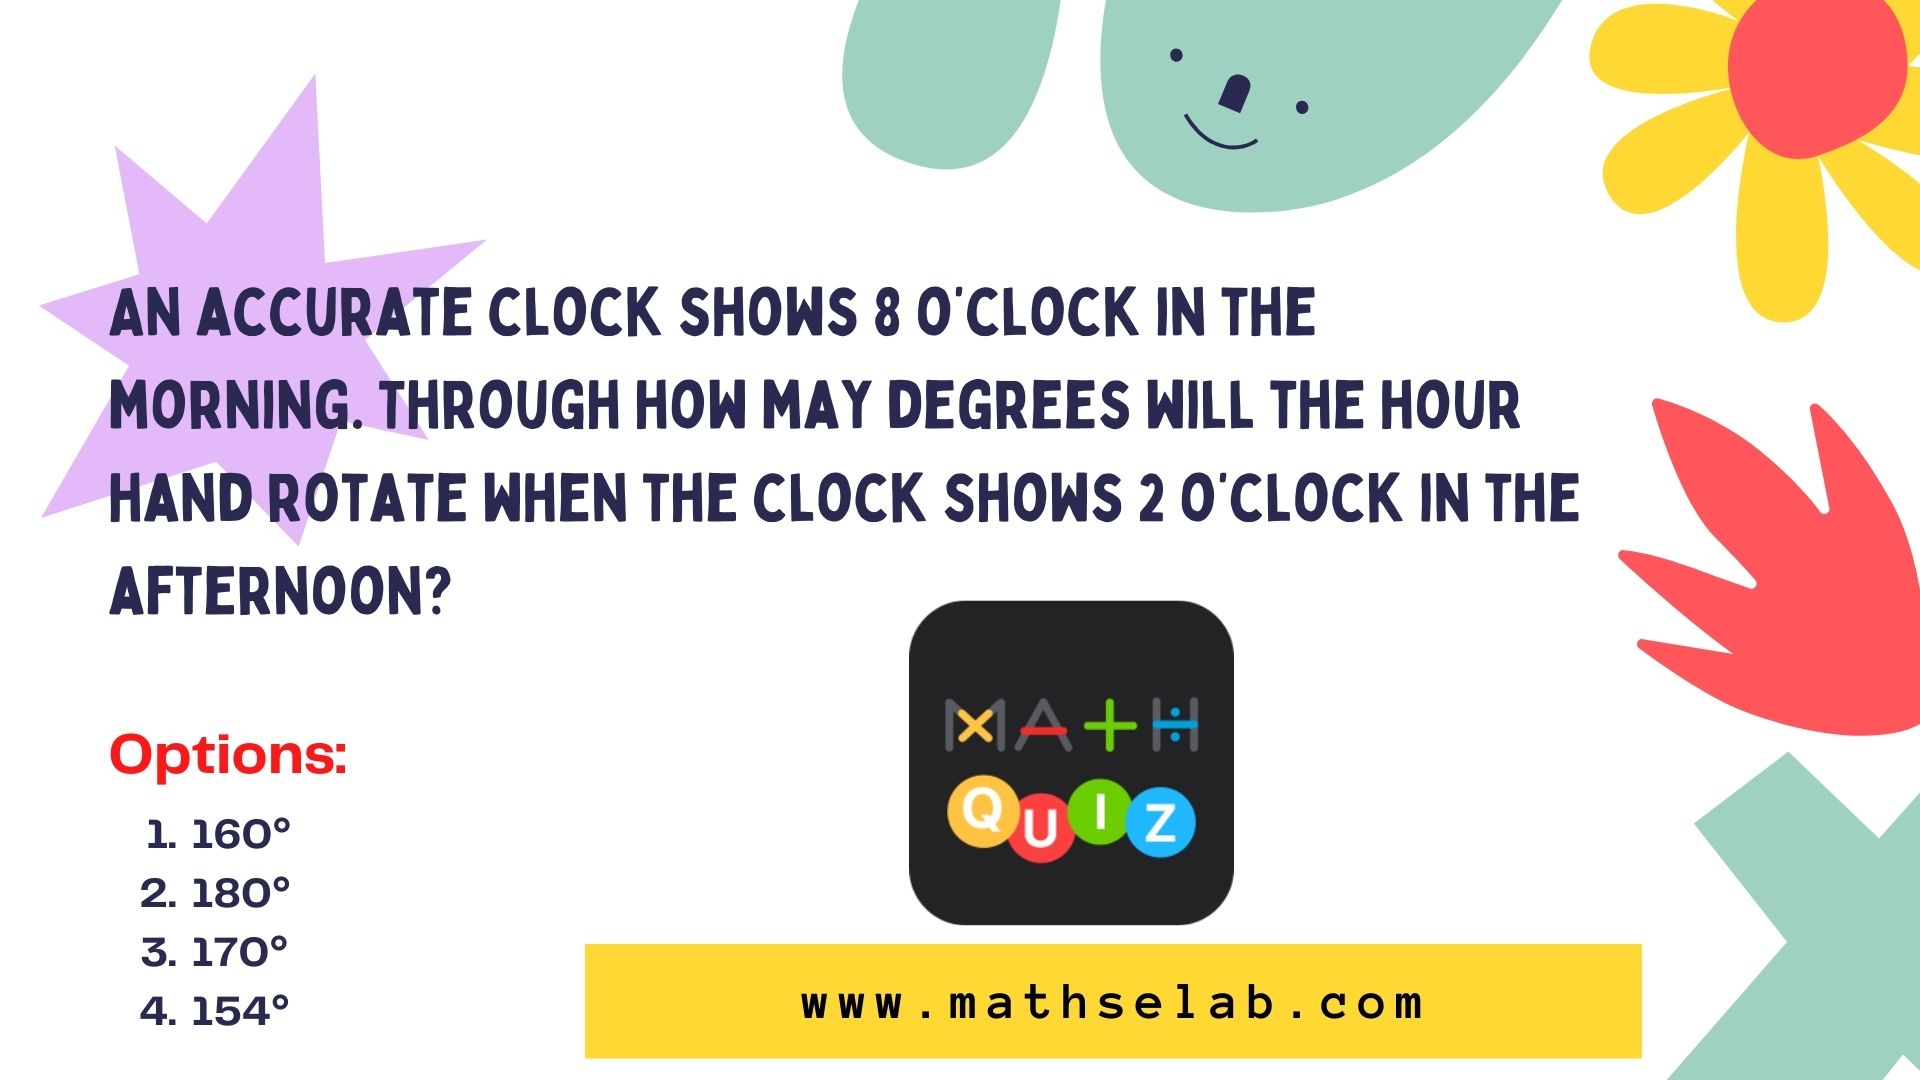 An accurate clock shows 8 o'clock in the morning. Through how may degrees will the hour hand rotate when the clock shows 2 o'clock in the afternoon?